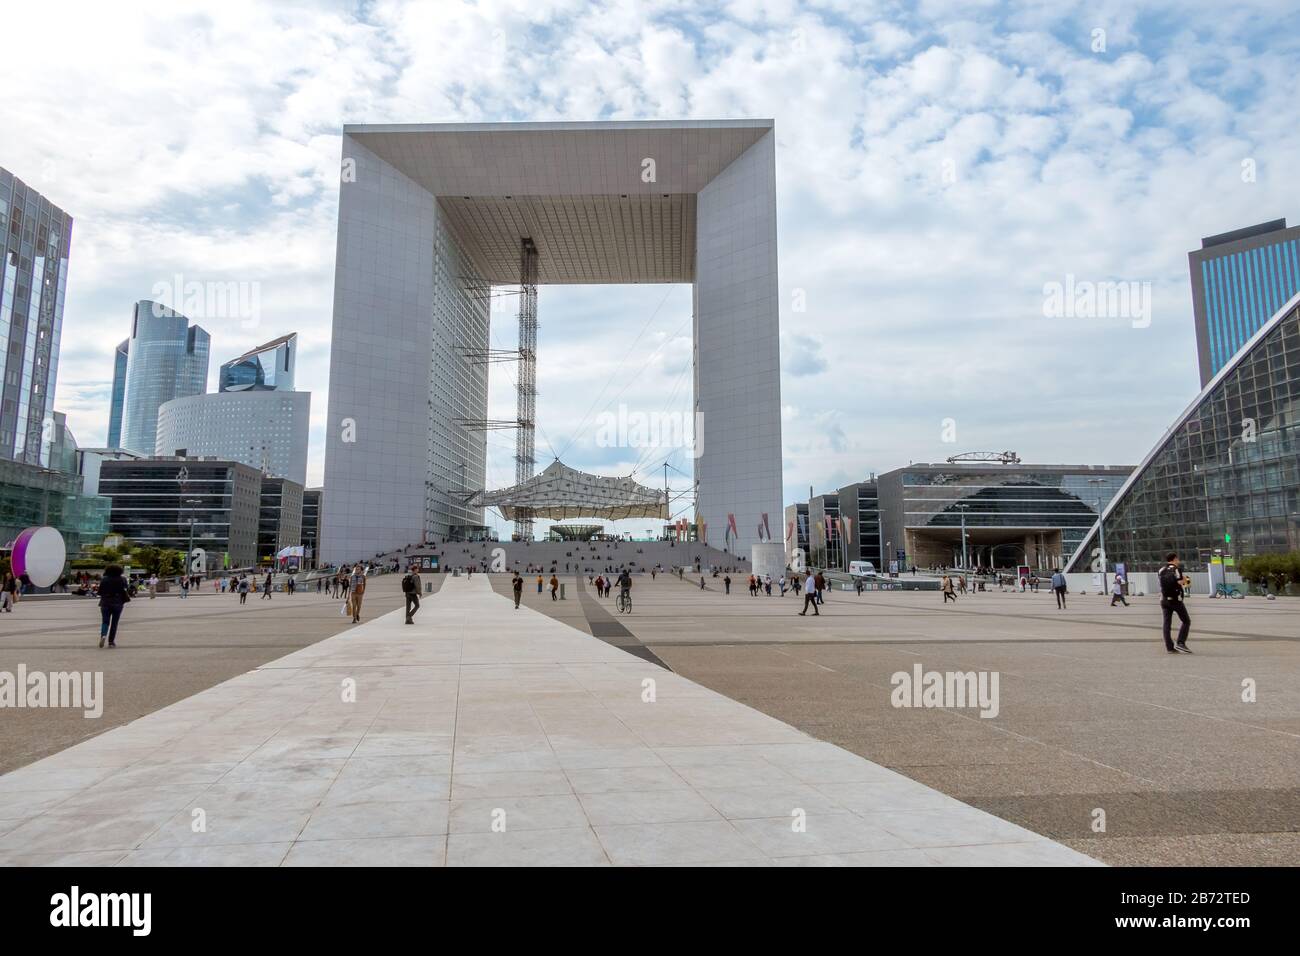 France. Summer day in the Parisian district of Defense. Grande Arche and the pedestrian square Stock Photo